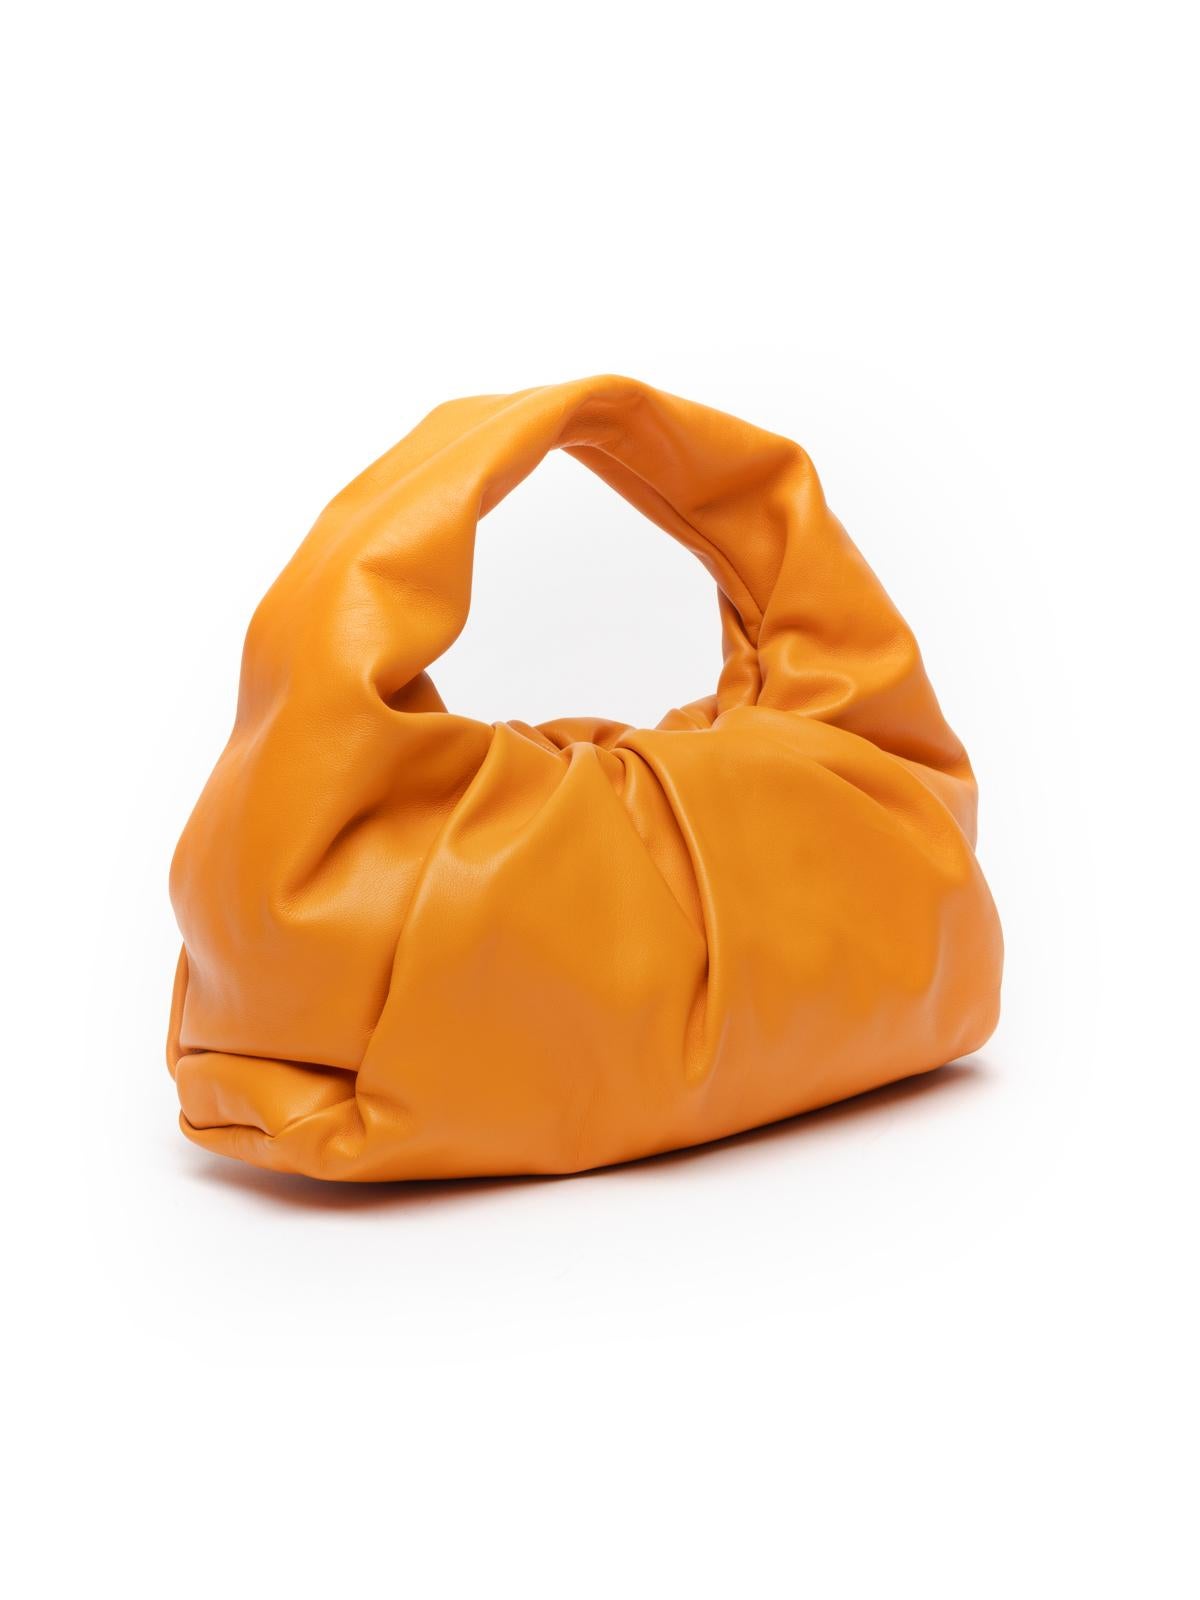 Editor\\\'s Note Throw this luxury consignment Bottega Veneta Shoulder Pouch bag over your shoulder to instantly enhance any designer resale outfit. Boasting exquisite orange lambskin, it is the perfect choice from our range of high end consignment